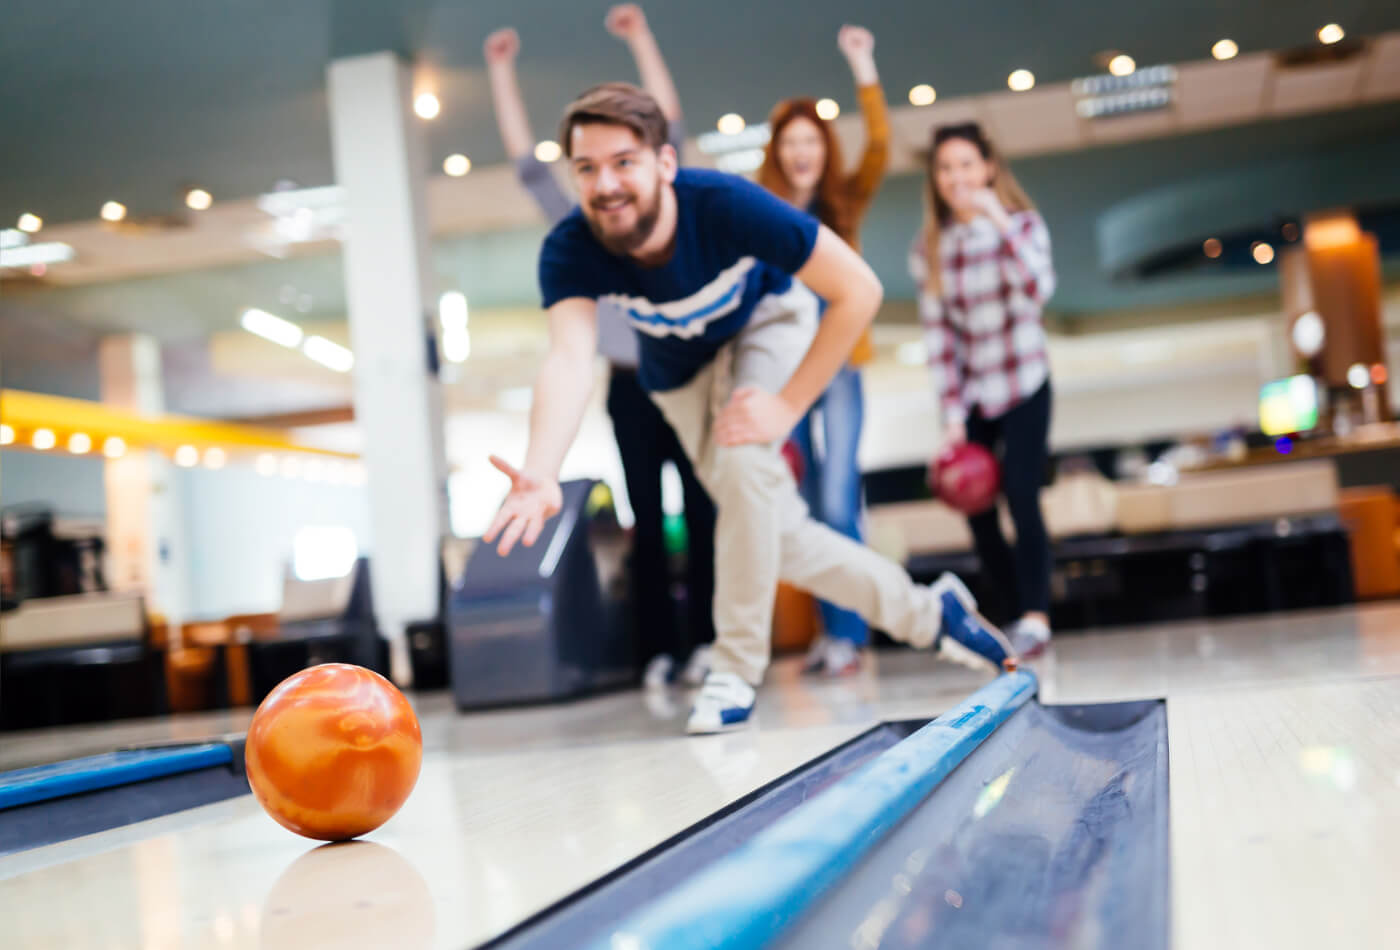 A group of four people bowling at a bowling alley